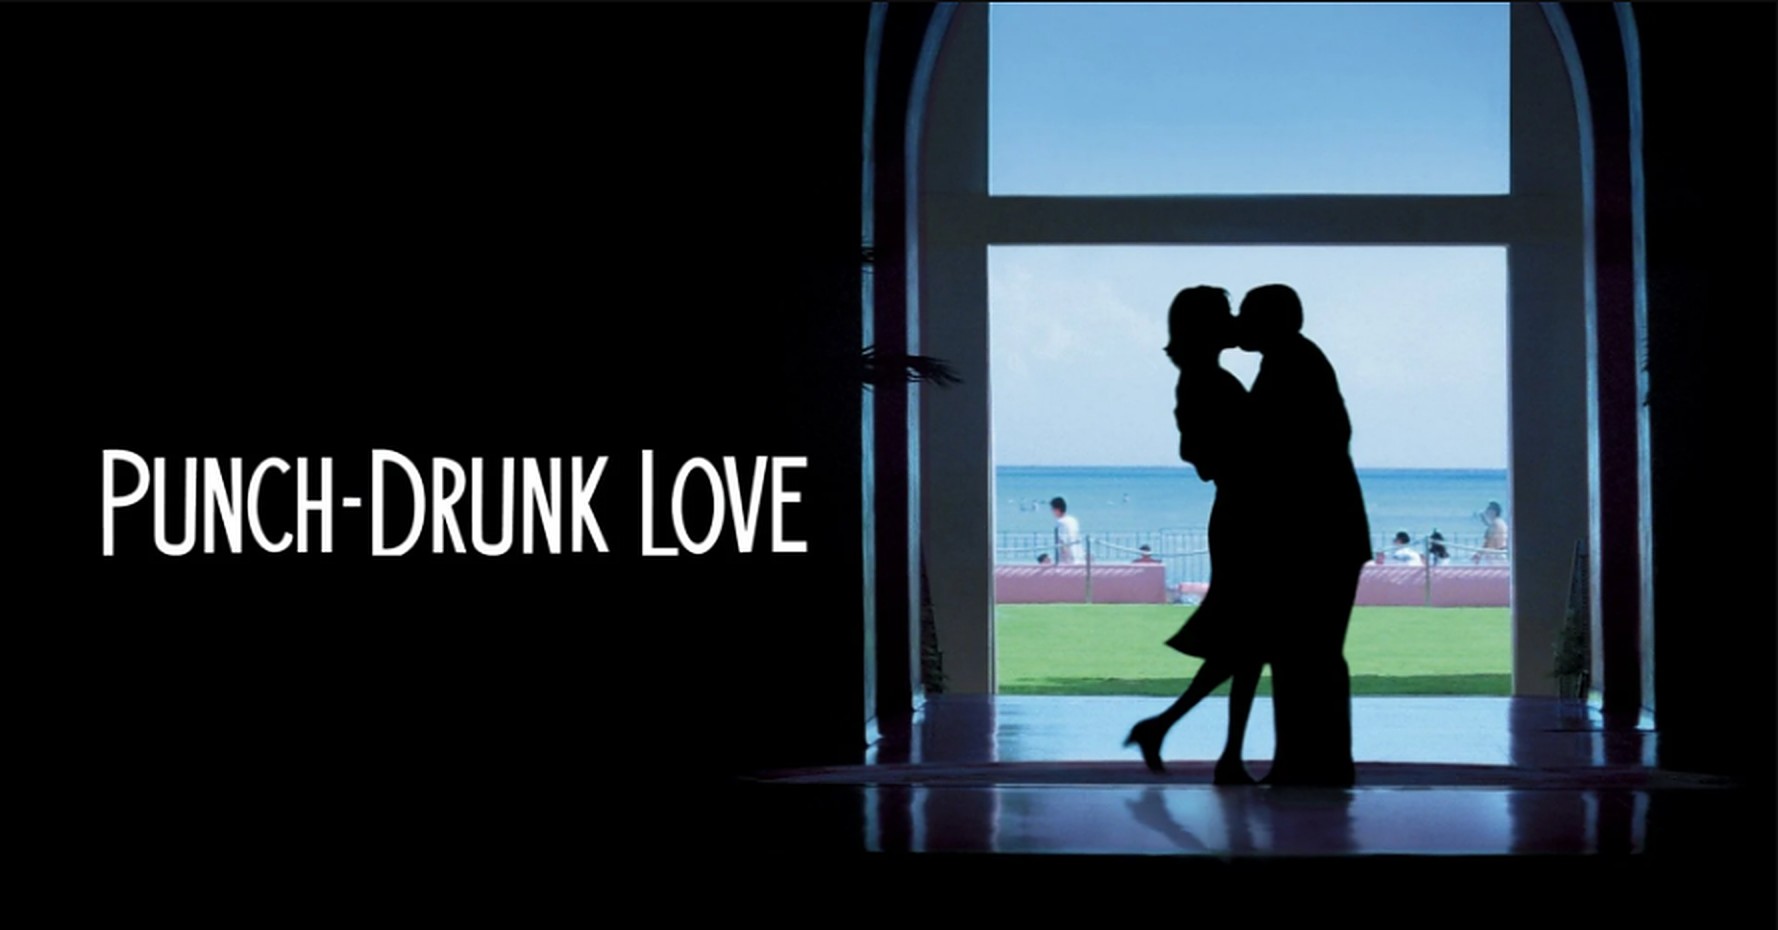 38-facts-about-the-movie-punch-drunk-love